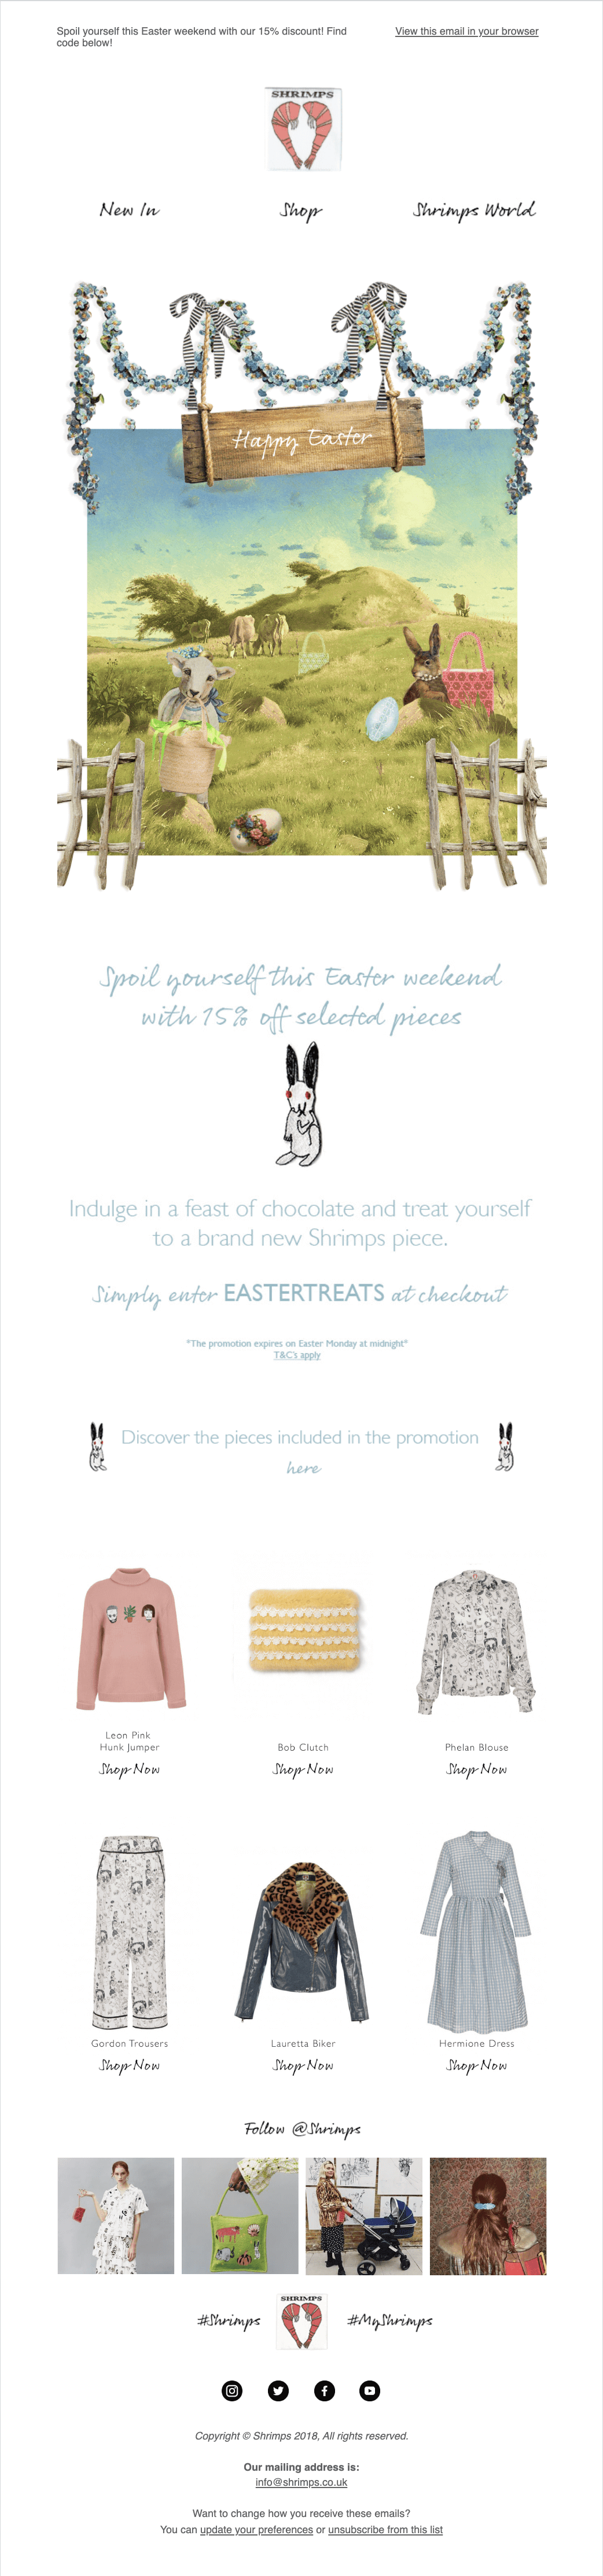 Easter Email Example by Shrimps (UK)